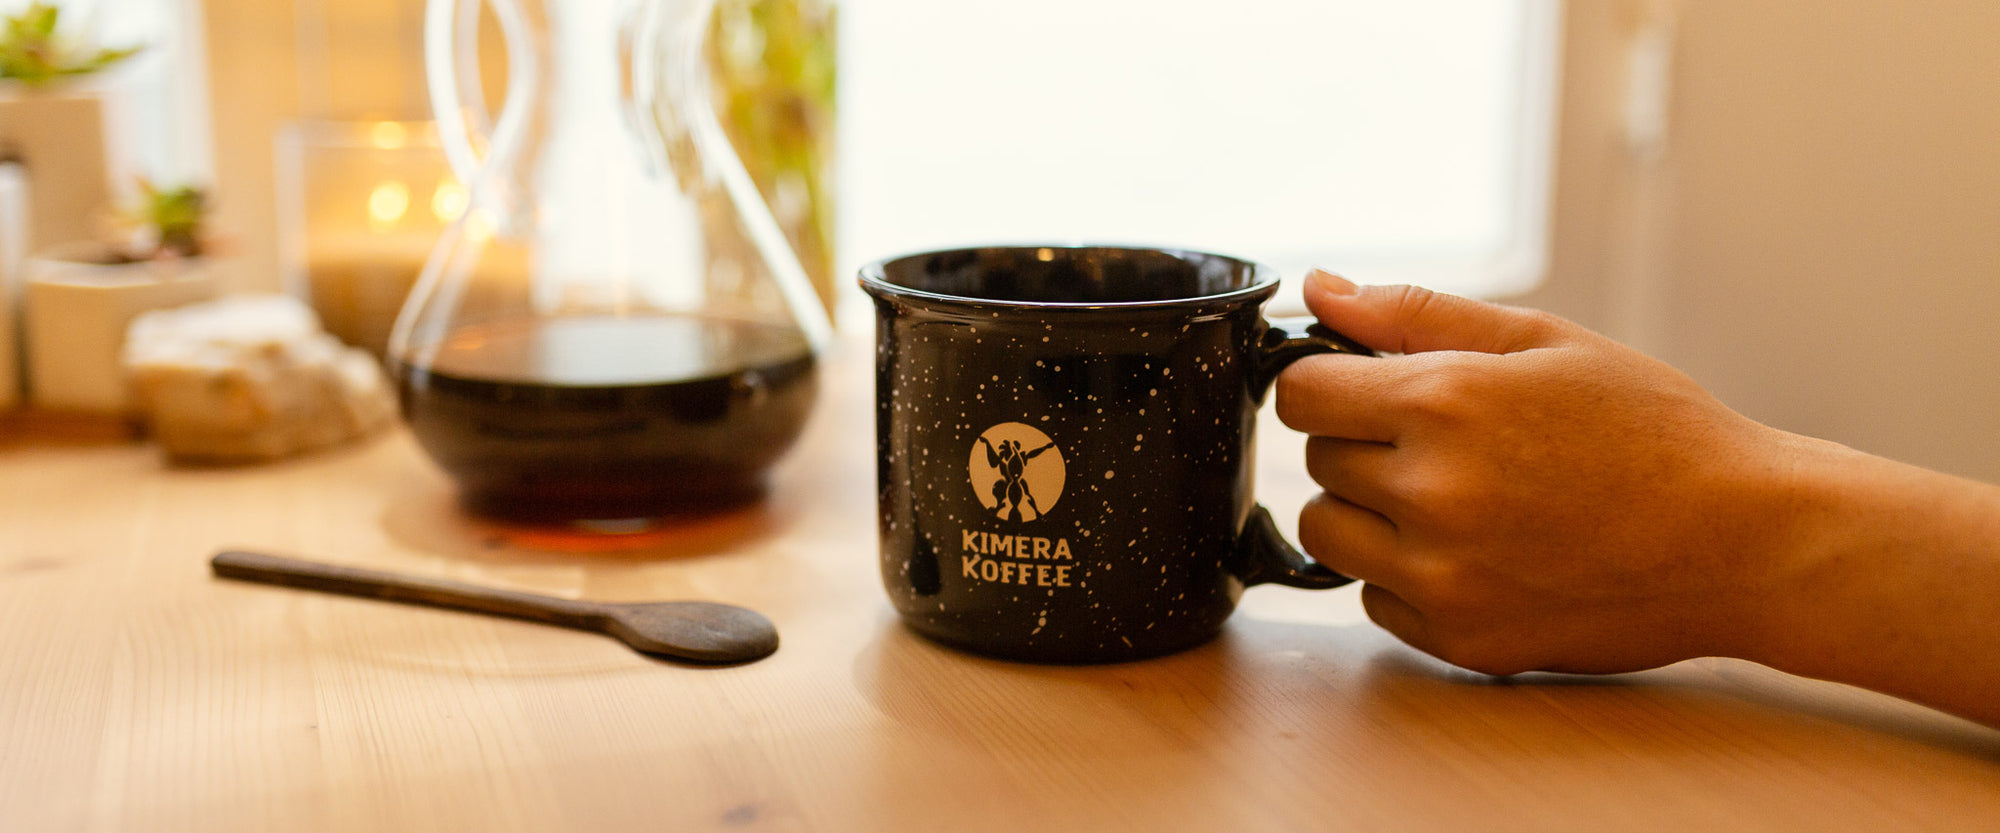 coffee mug next to chemex jar with black coffee and wooden spoon on table